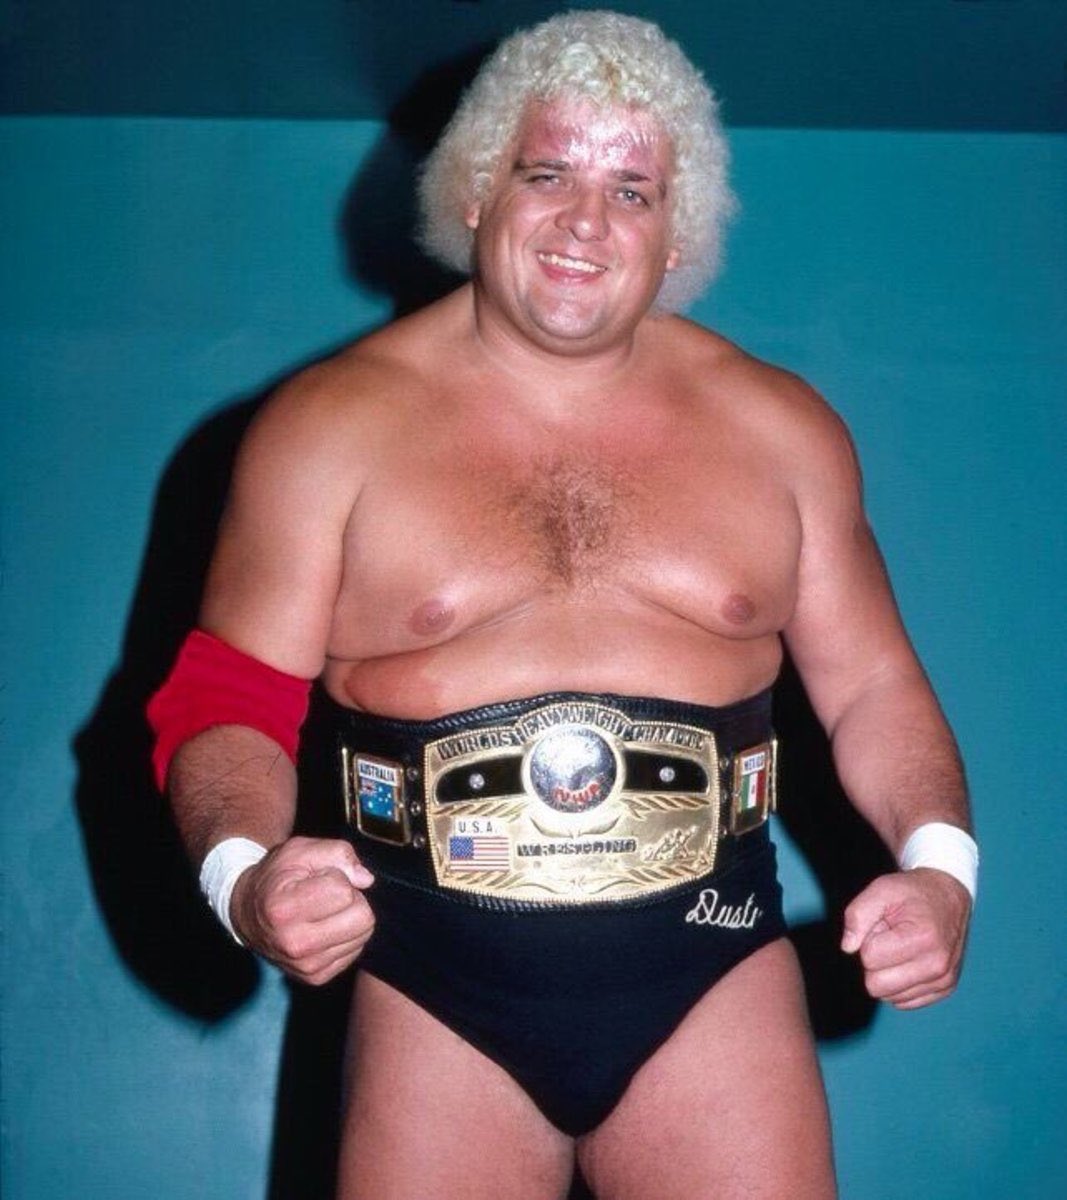 Happy birthday to a legend, and the son of a plumber. The American Dream, Dusty Rhodes 